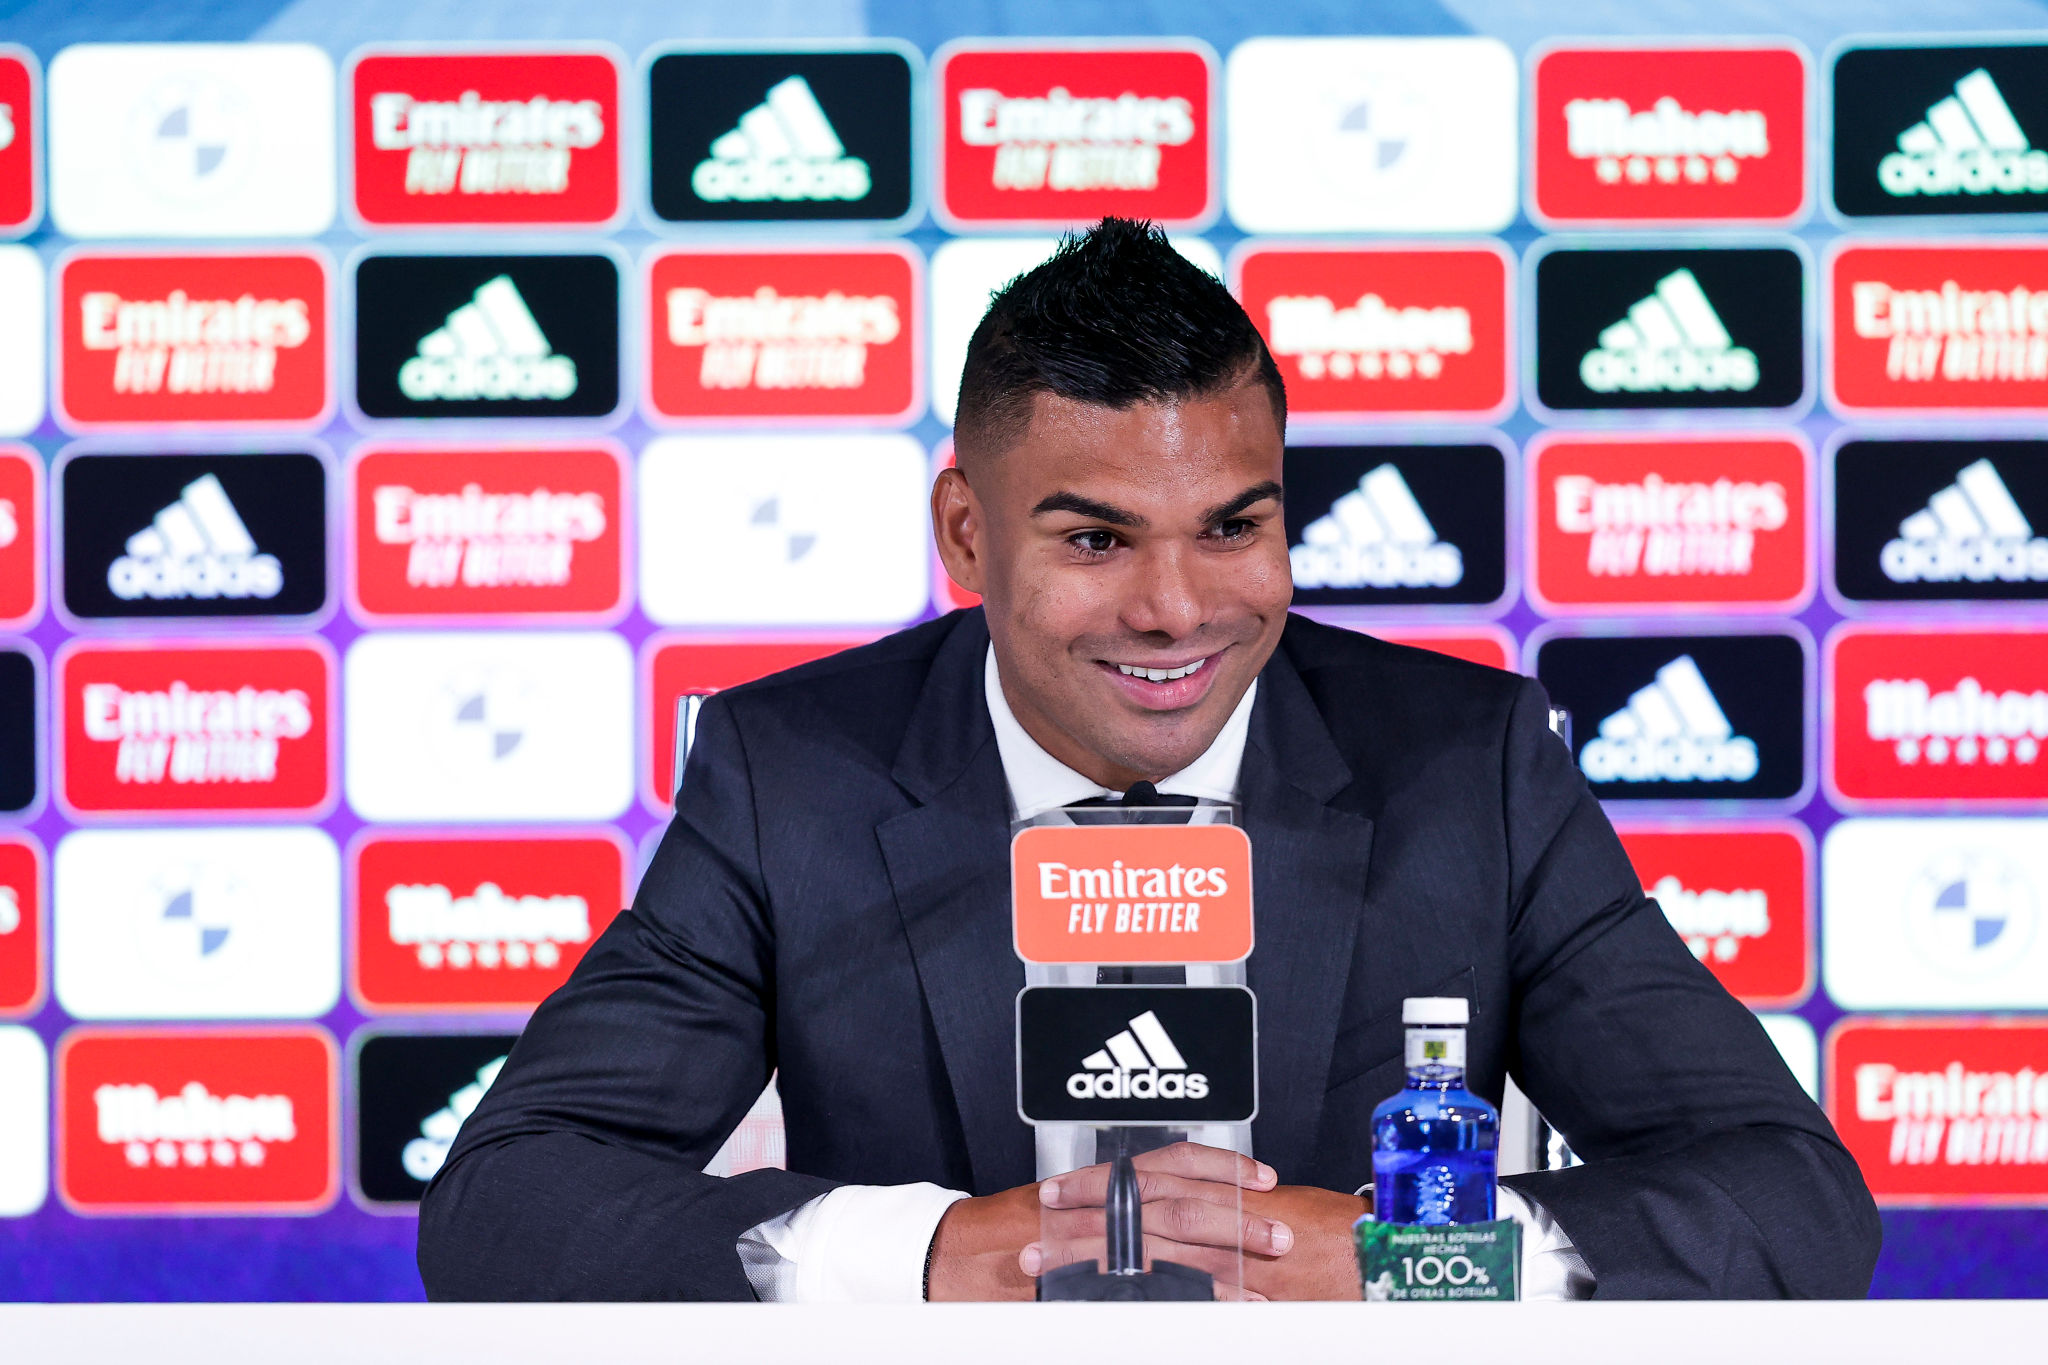 Premier League 2022-23: New Man United signing Casemiro in tears at Farewell says, "My cycle at Real Madrid is finished," as the Brazilian is set to be unveiled at Old Trafford ahead of Manchester United vs Liverpool game